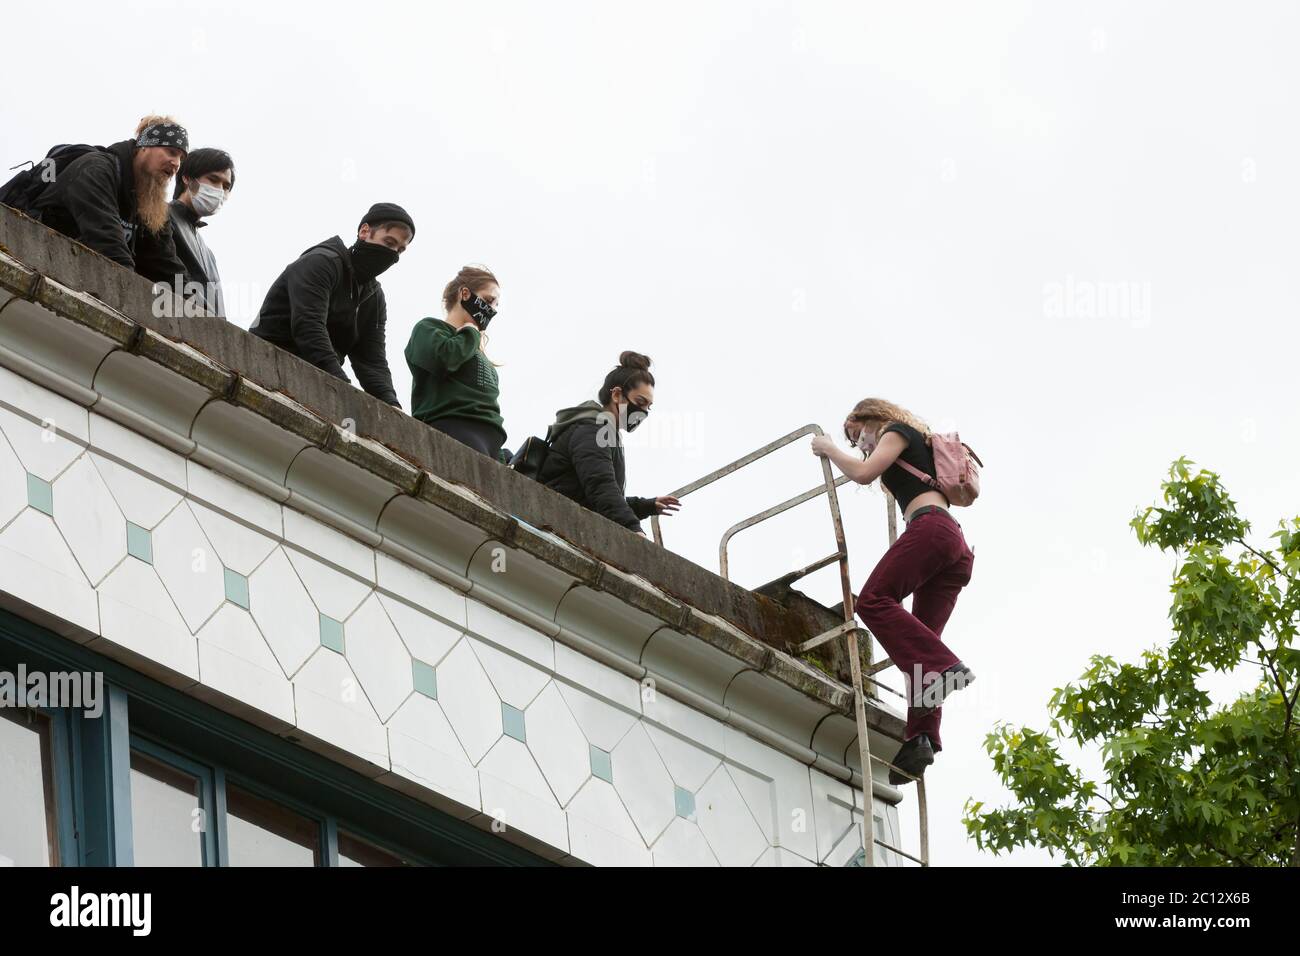 A young woman climbs the fire escape of the Kelly-Springfield Motor Truck Building to access the roof in the “Capitol Hill Autonomous Zone” in Seattle on Friday, June 12, 2020. The zone, also known as CHAZ, is a self-declared intentional community and commune established when the Seattle Police Department closed the East Precinct after days of large protests and occasional violent clashes. Stock Photo